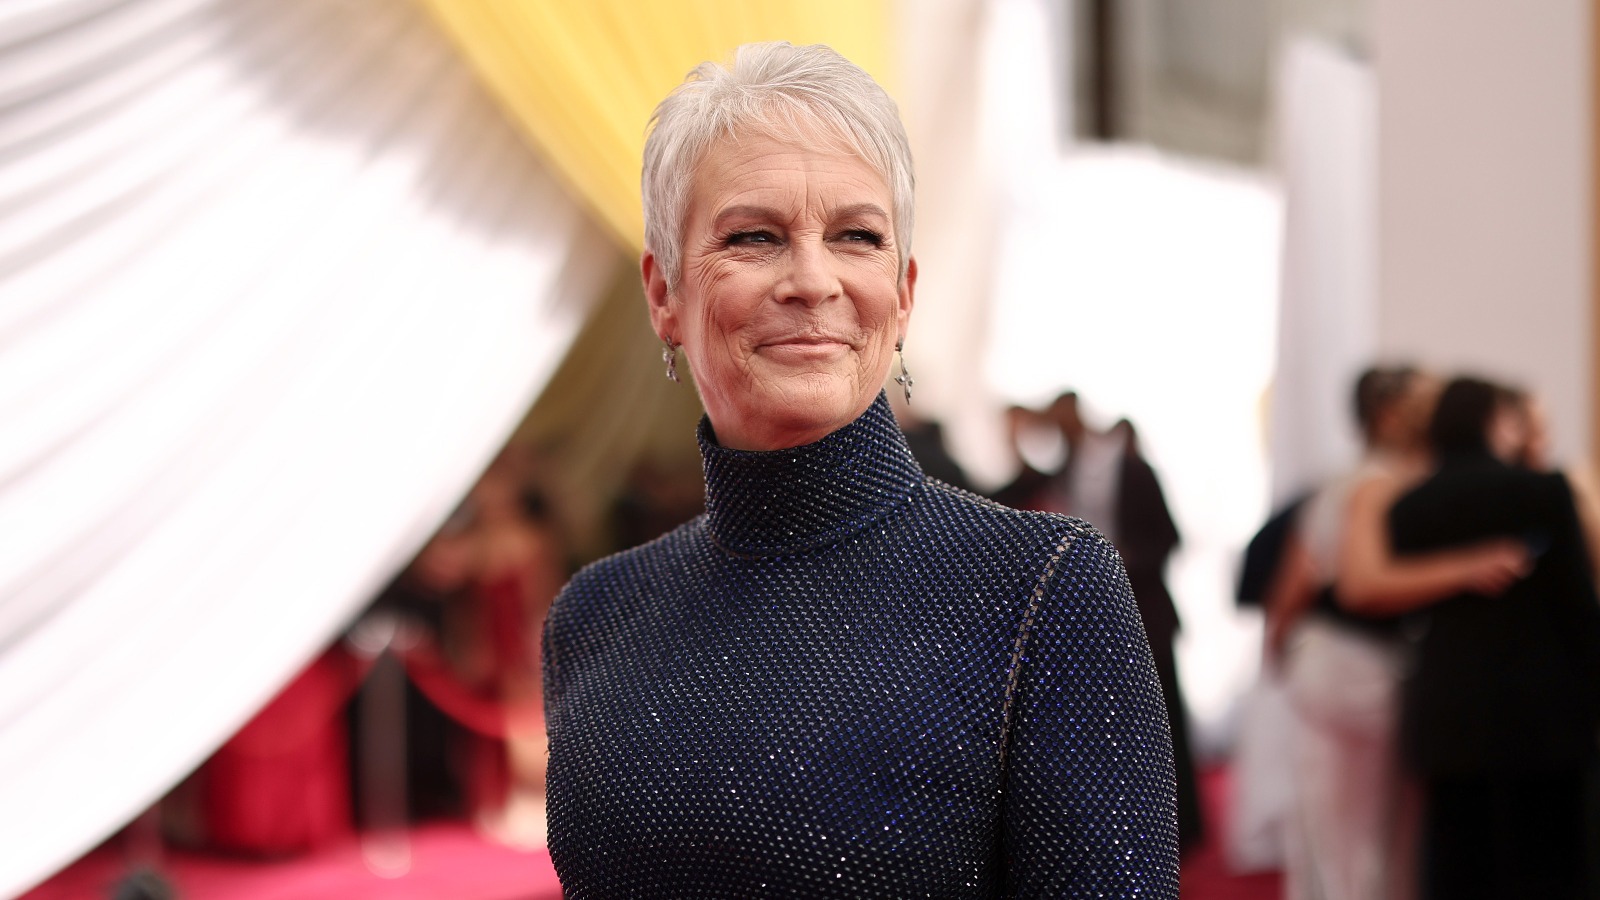 Jamie Lee Curtis throws shade at Marvel for overusing green screens